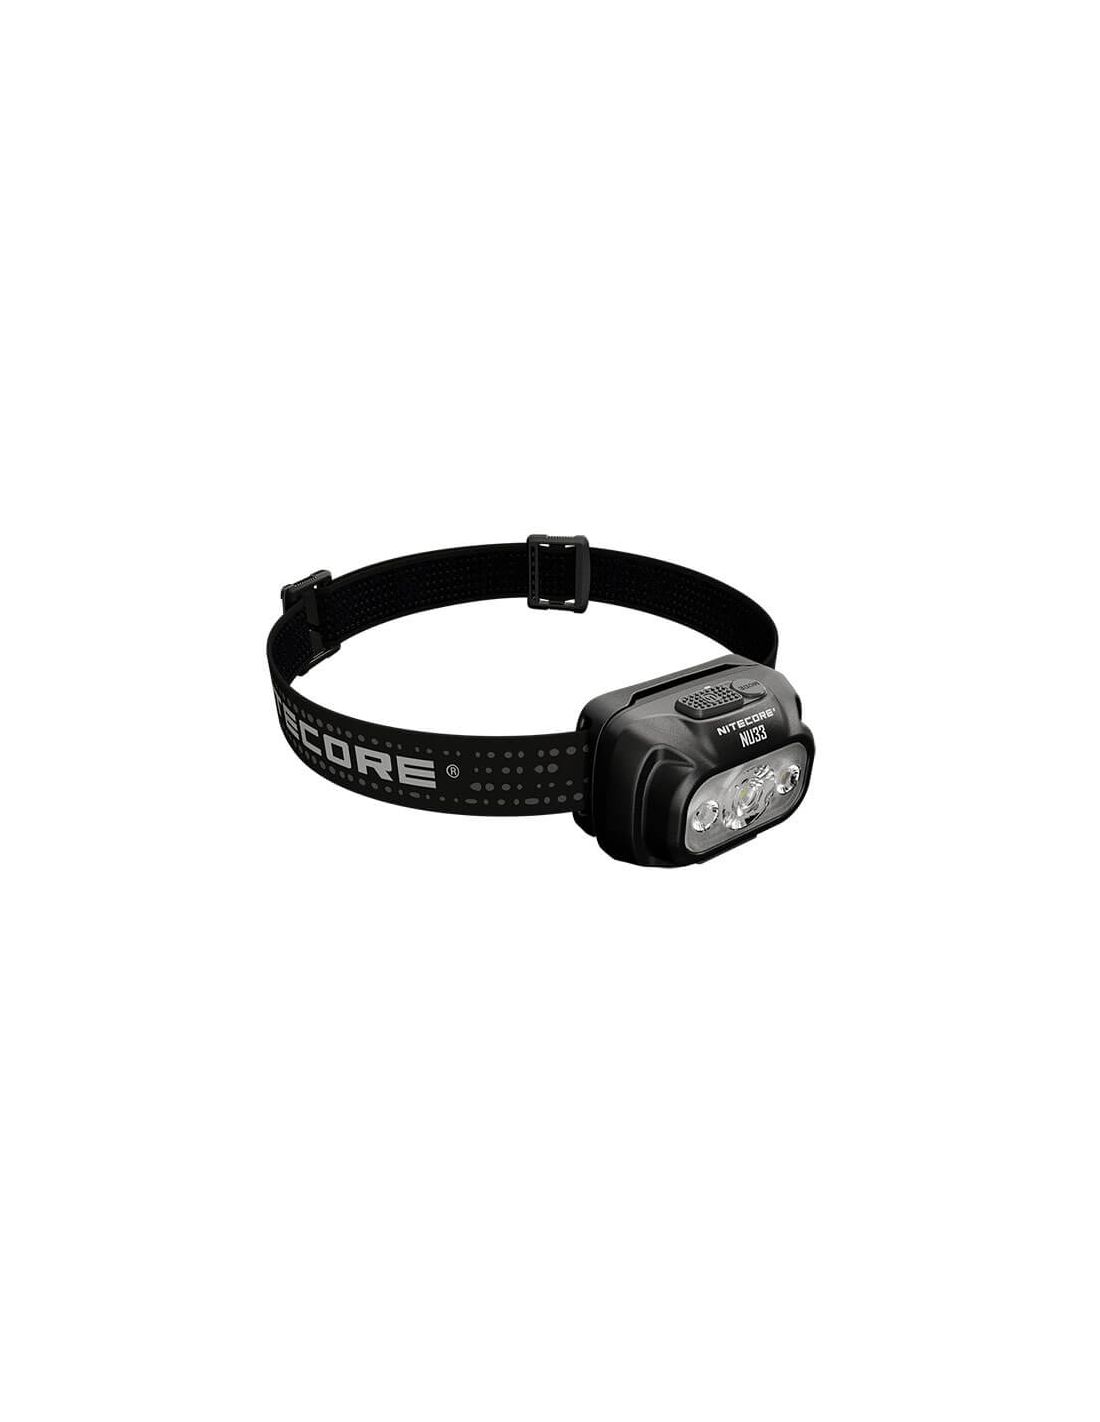 Lampe frontale 2 LED blanches + 1 LED rouge - LedLenser® H19R Core